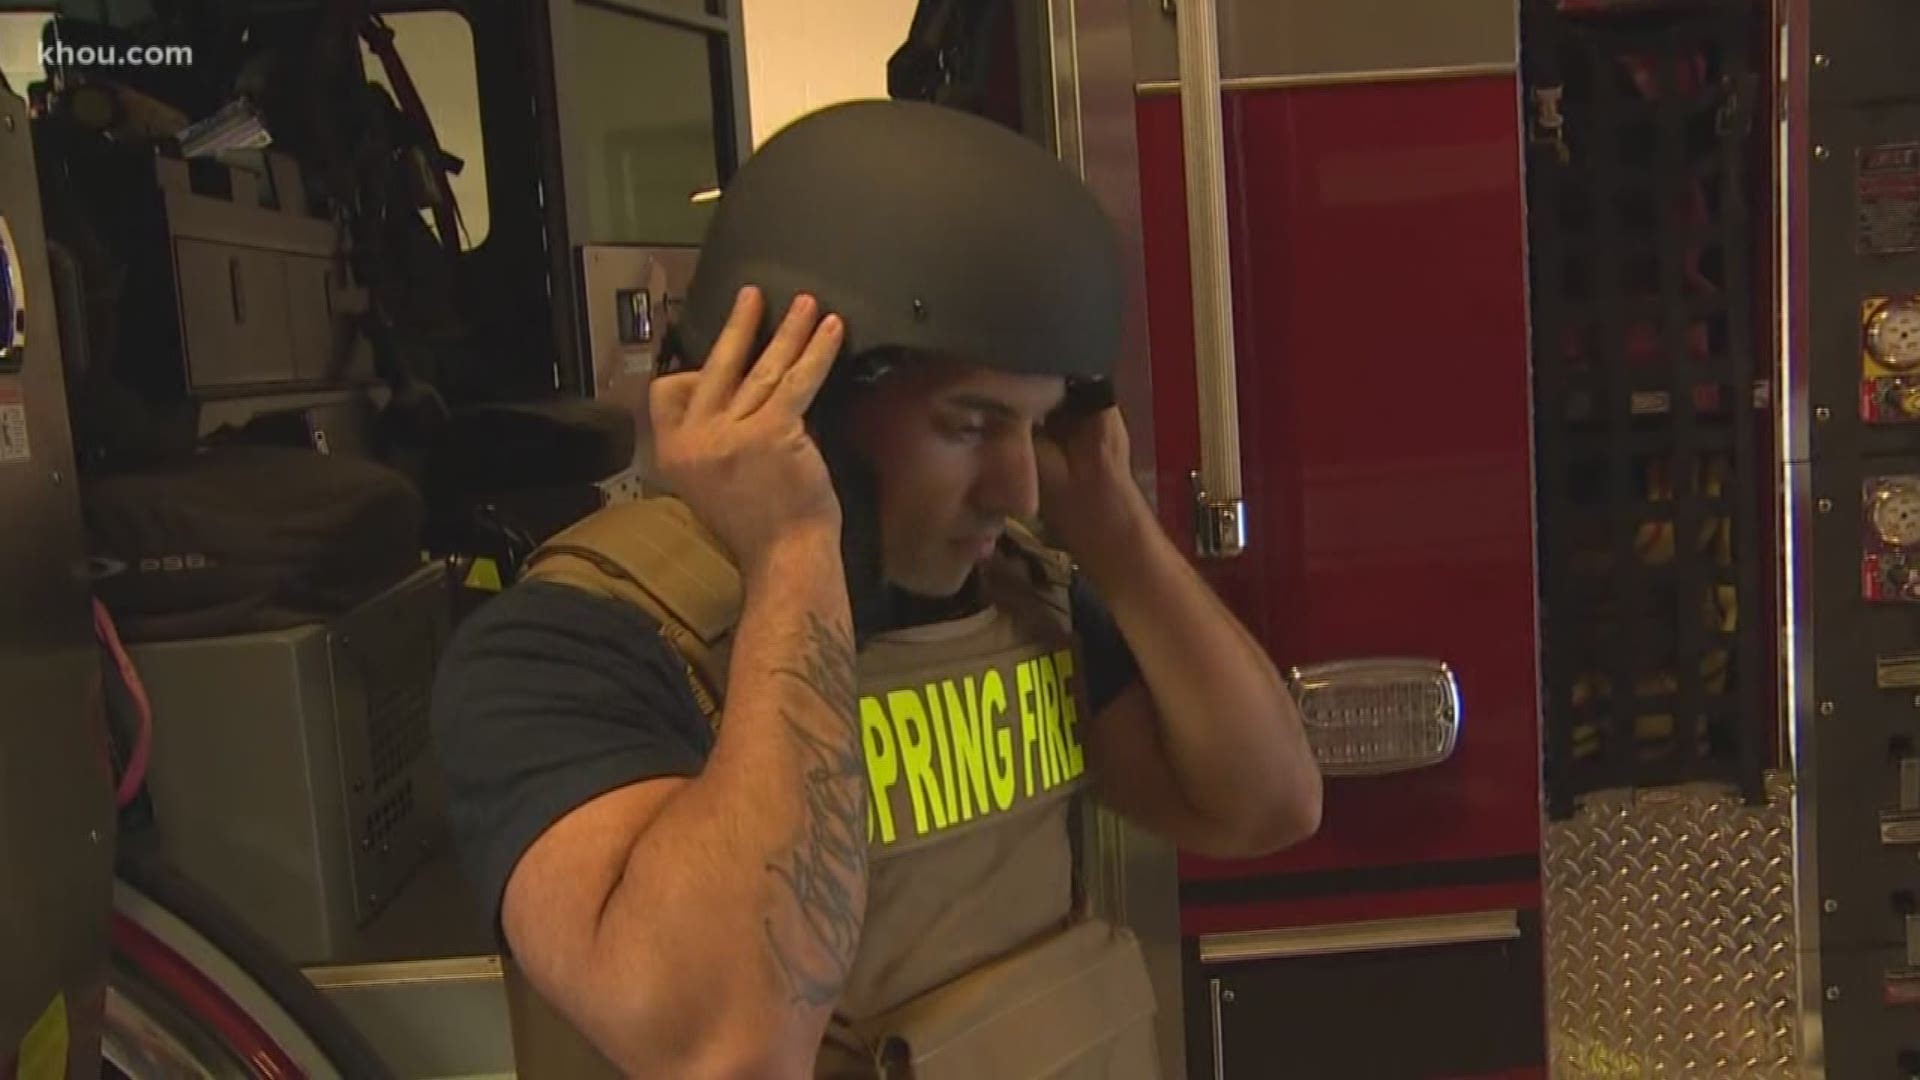 Firefighters in Spring are the latest in the Houston area to get bulletproof vests and helmets. They say it's a necessary layer of protection.